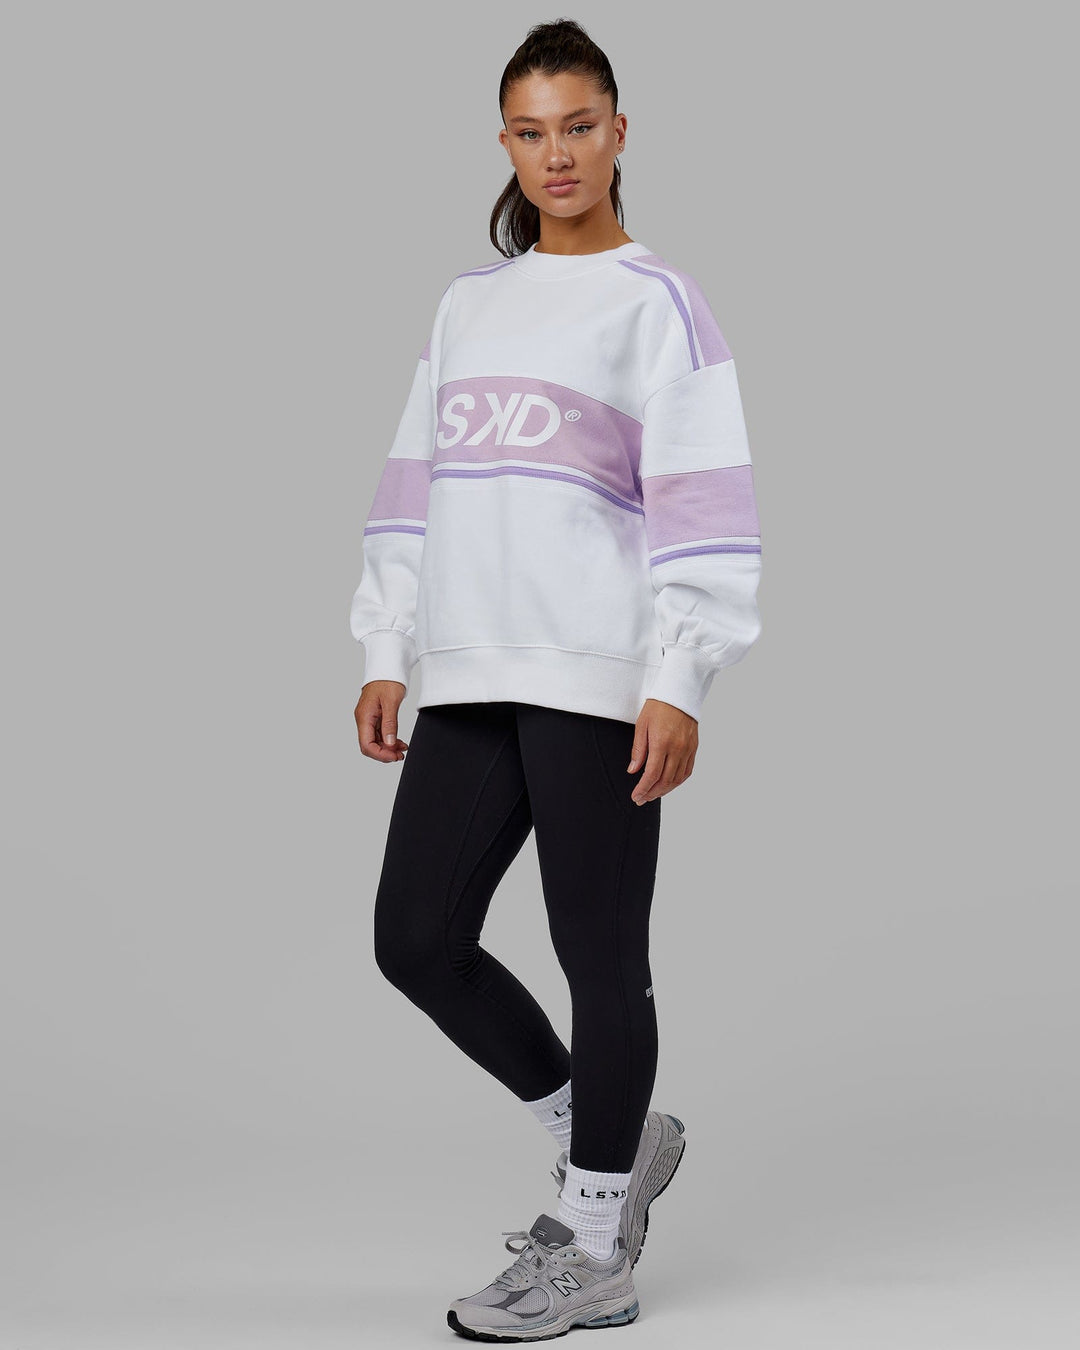 Woman wearing Unisex A-Team Sweater Oversize - White-Pale Lilac